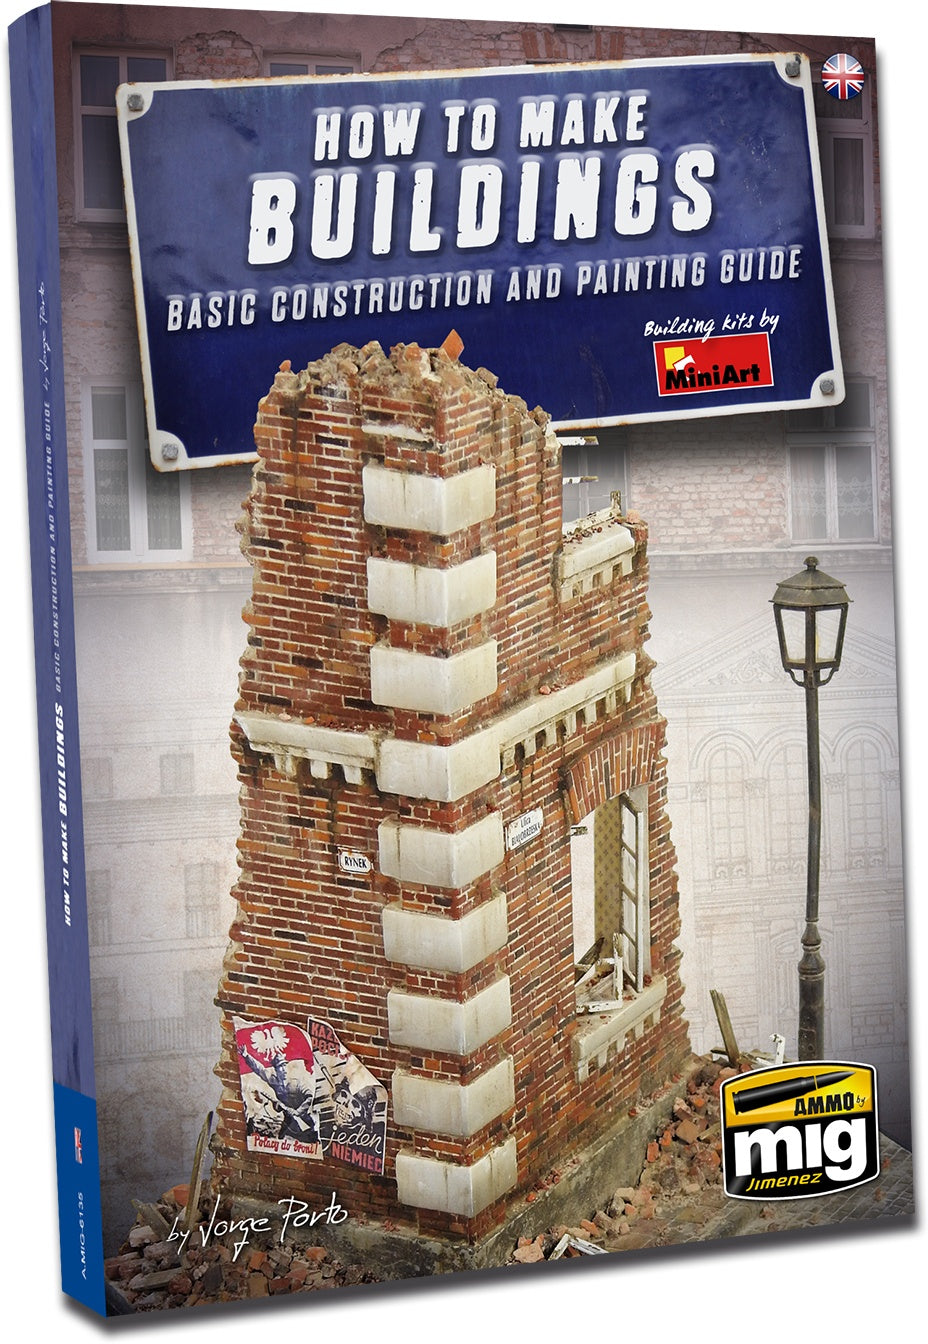 6135 HOW TO MAKE BUILDINGS. BASIC CONSTRUCTION AND PAINTING